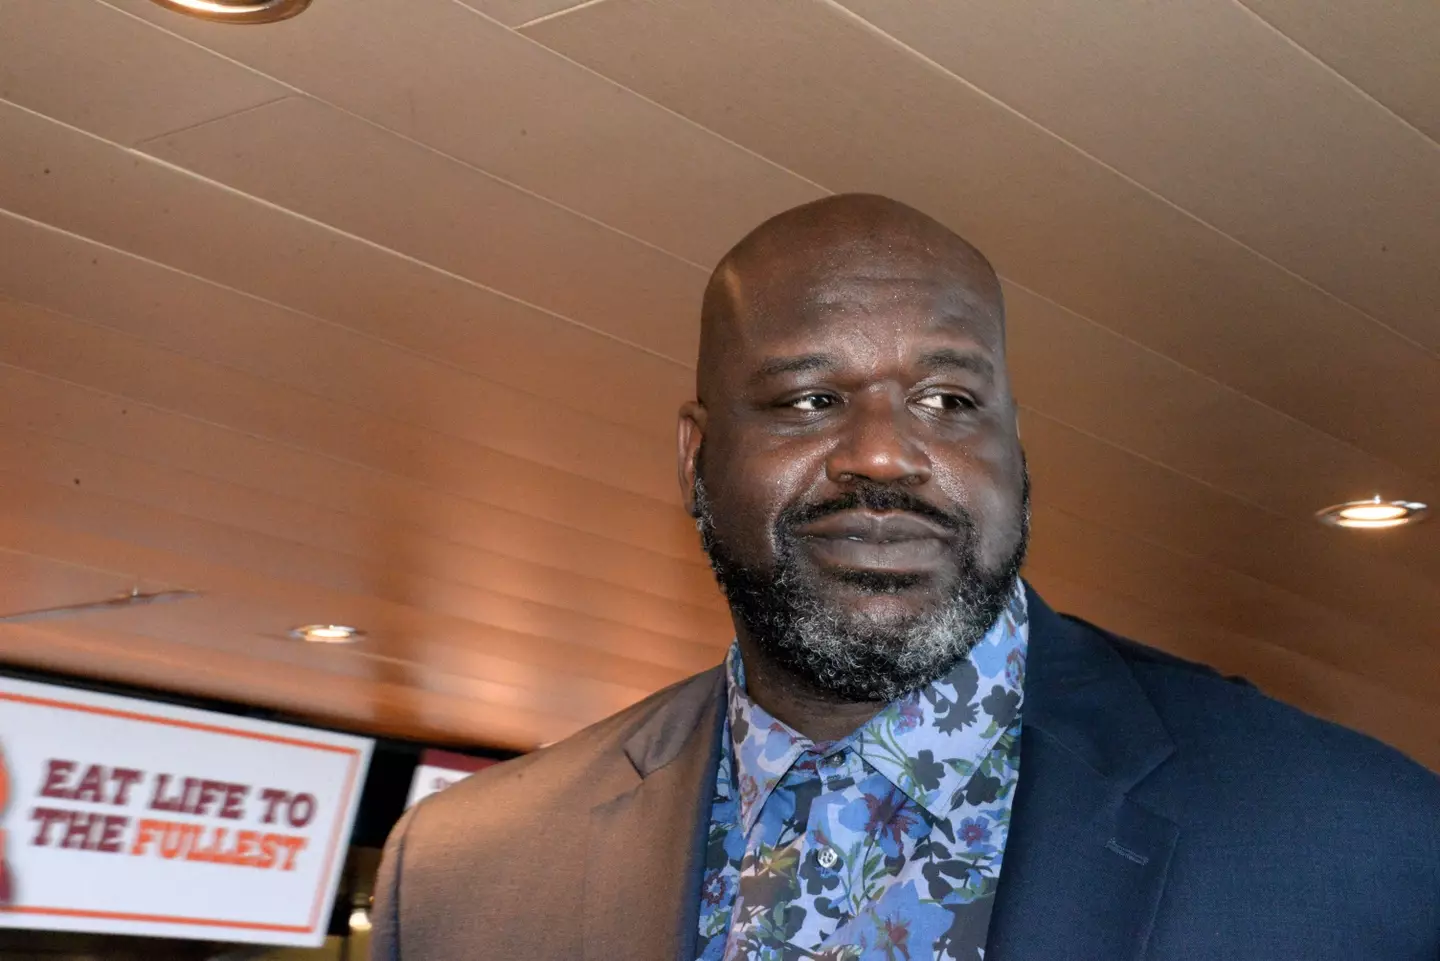 Shaquille O'Neal supports the conspiracy theory that the Earth is flat.